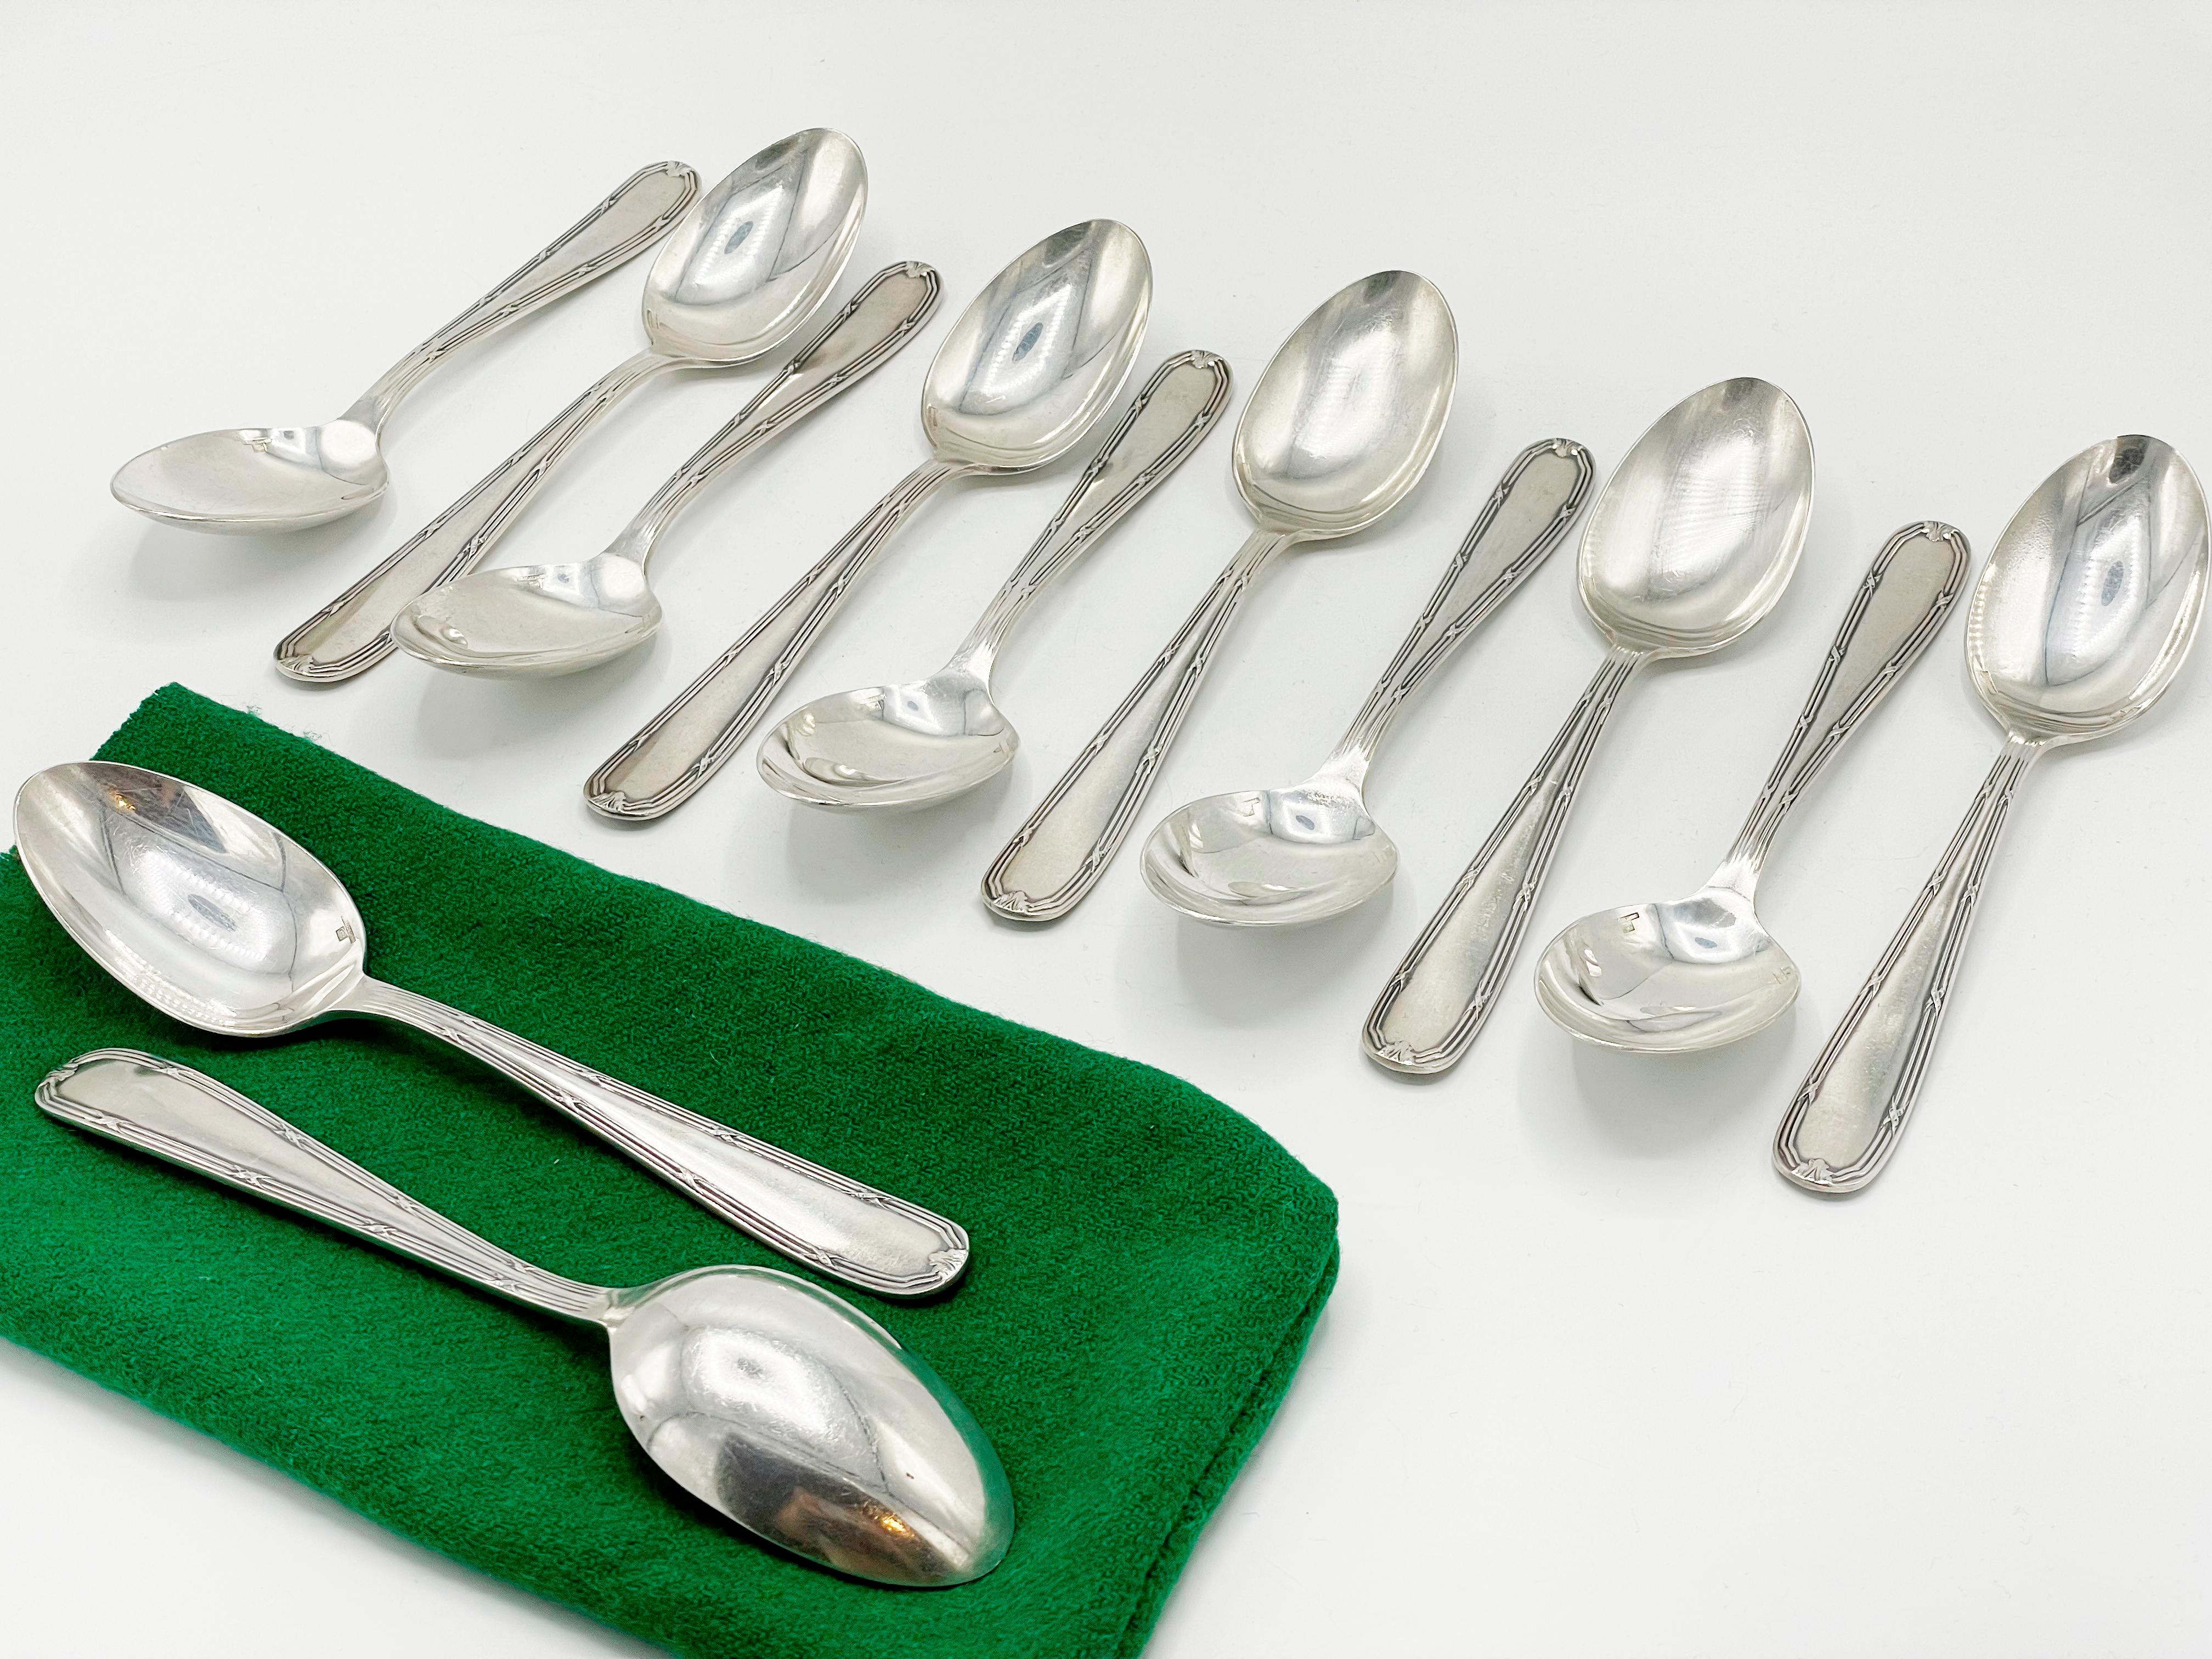 Wonderful Christofle Flatware Service Set 143 pieces in Silverplated
Made in Argentina

Total 143 Pieces Table Cutlery Set:

12 Forks Dinner - 21 centimeters
12 Forks Salad  - 17.5 centimeters
12 Forks Fish - 17,5 centimeters
12 Forks Shirmp - 13,5